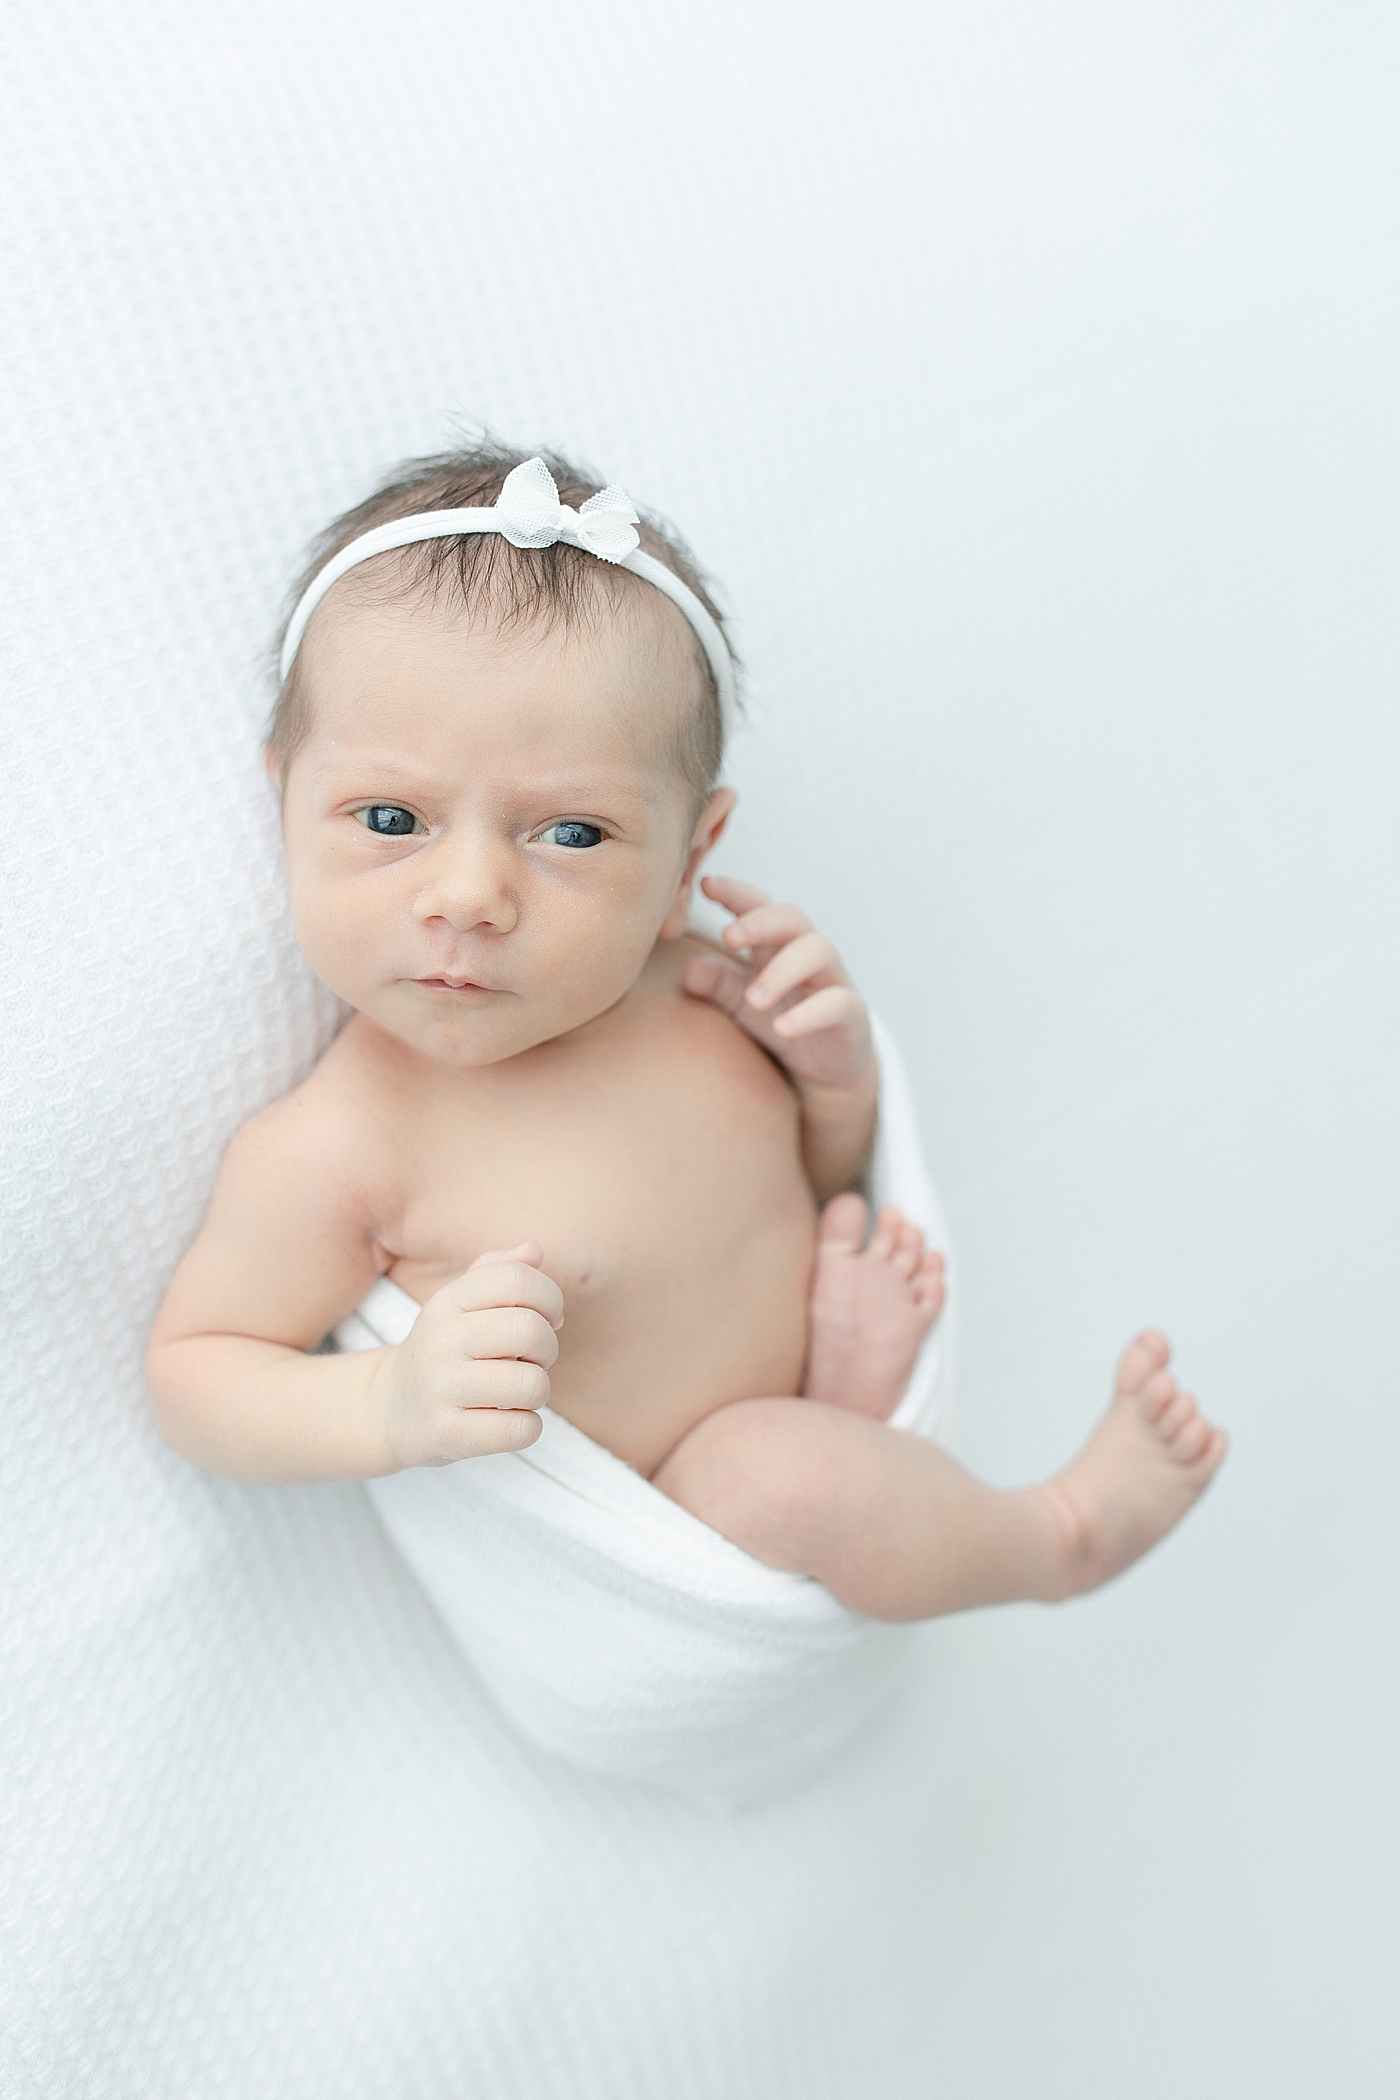 Newborn baby with white headband and bow | Photo by Little Sunshine Photography